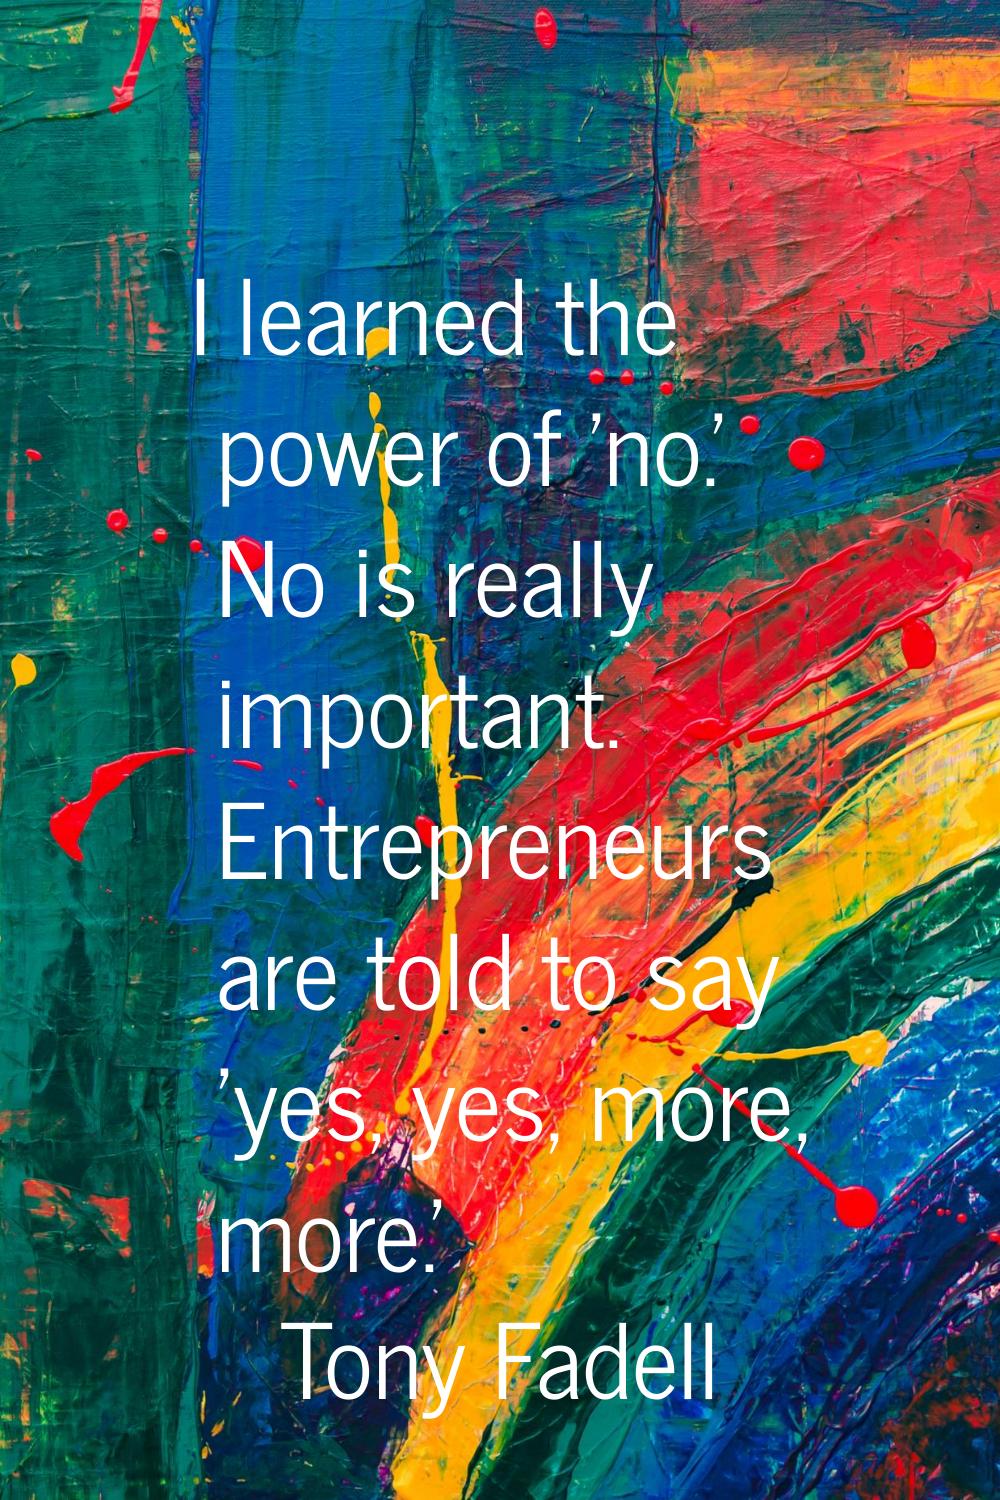 I learned the power of 'no.' No is really important. Entrepreneurs are told to say 'yes, yes, more,